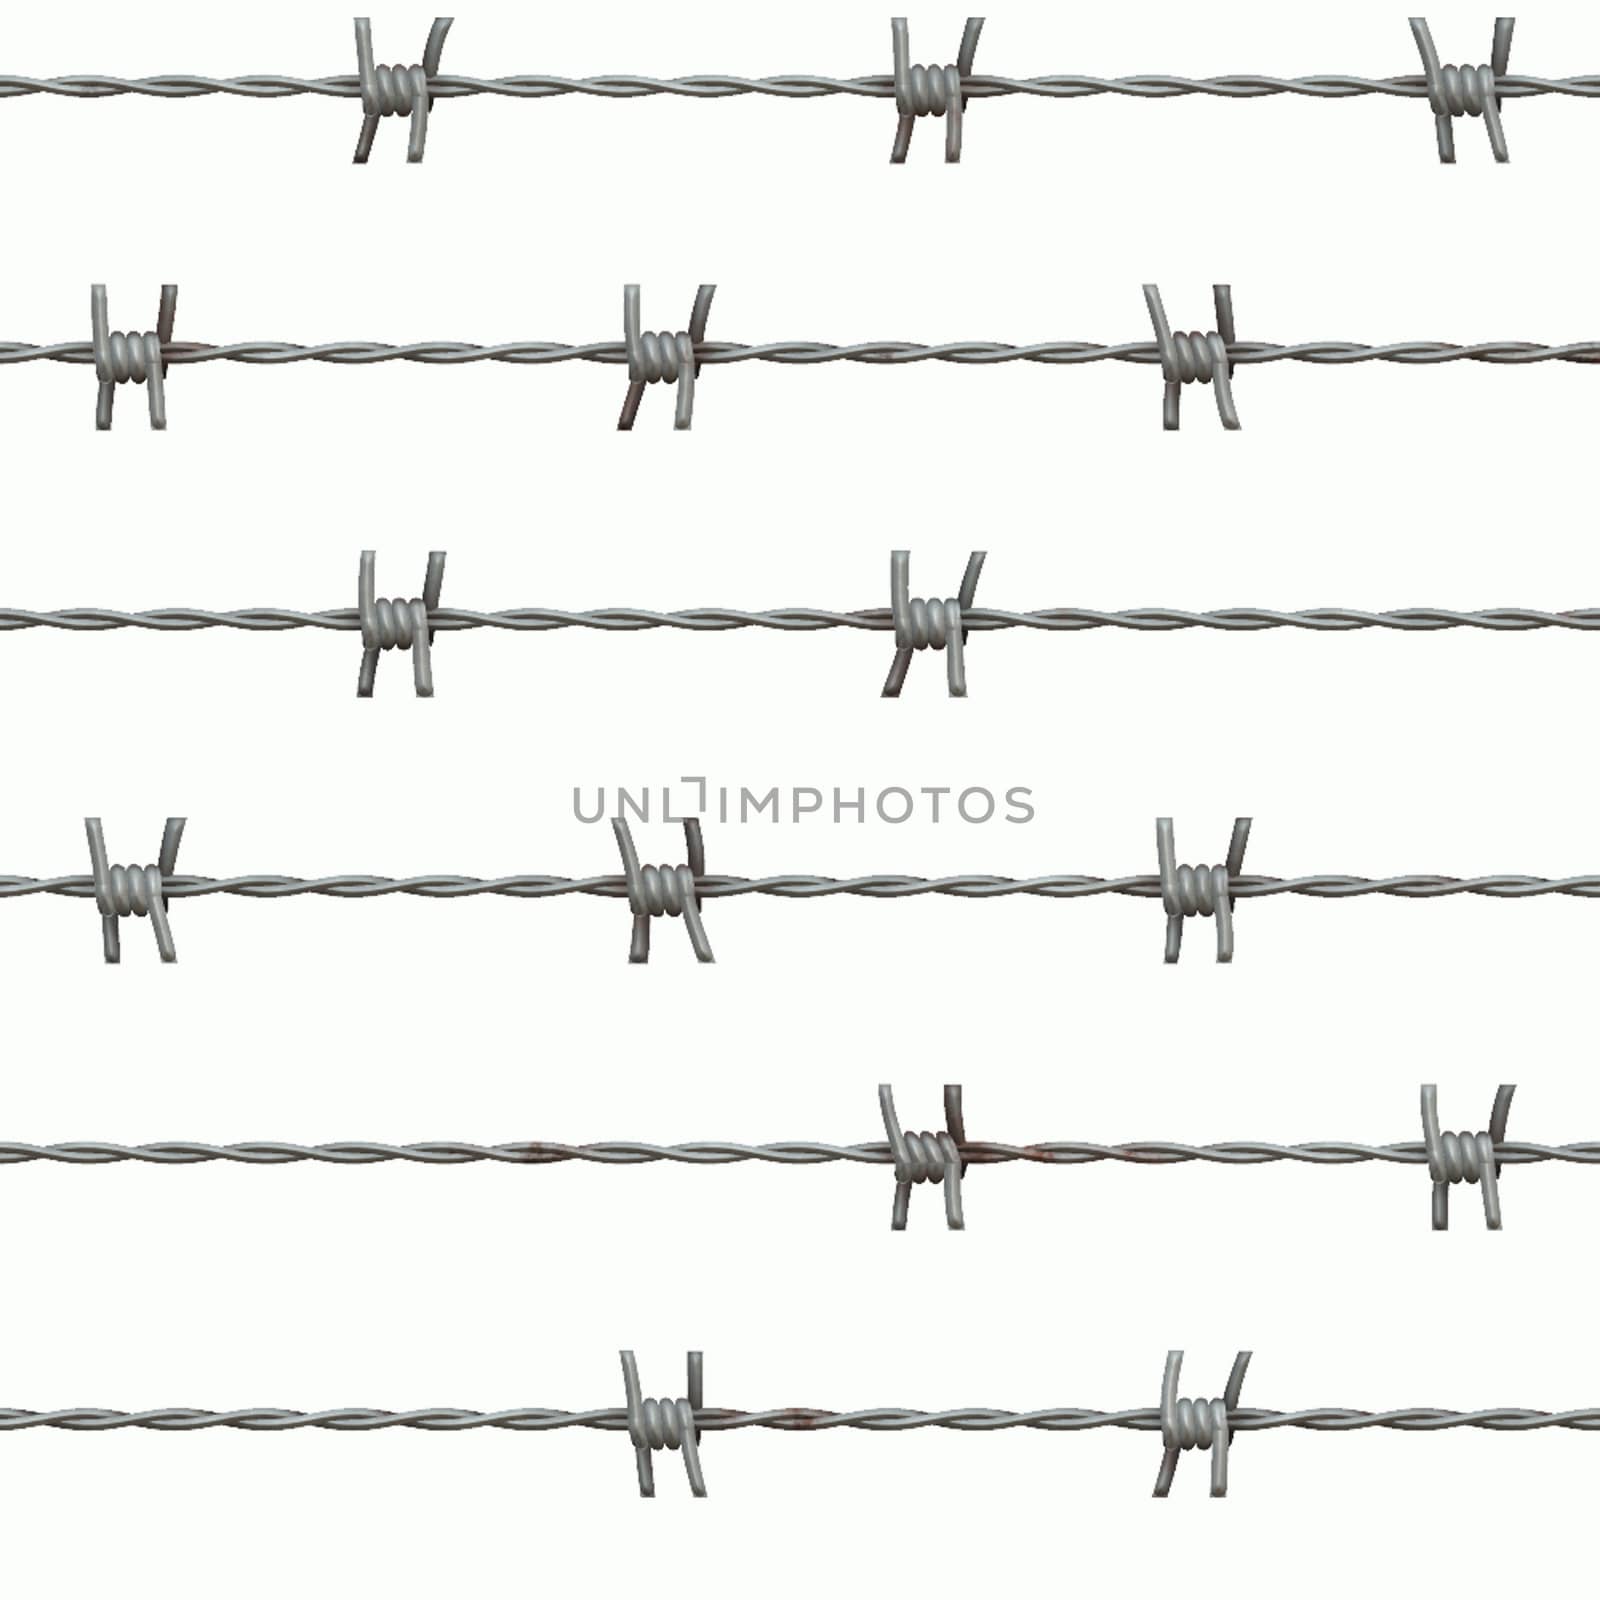 barbed wires isolated on white back ground